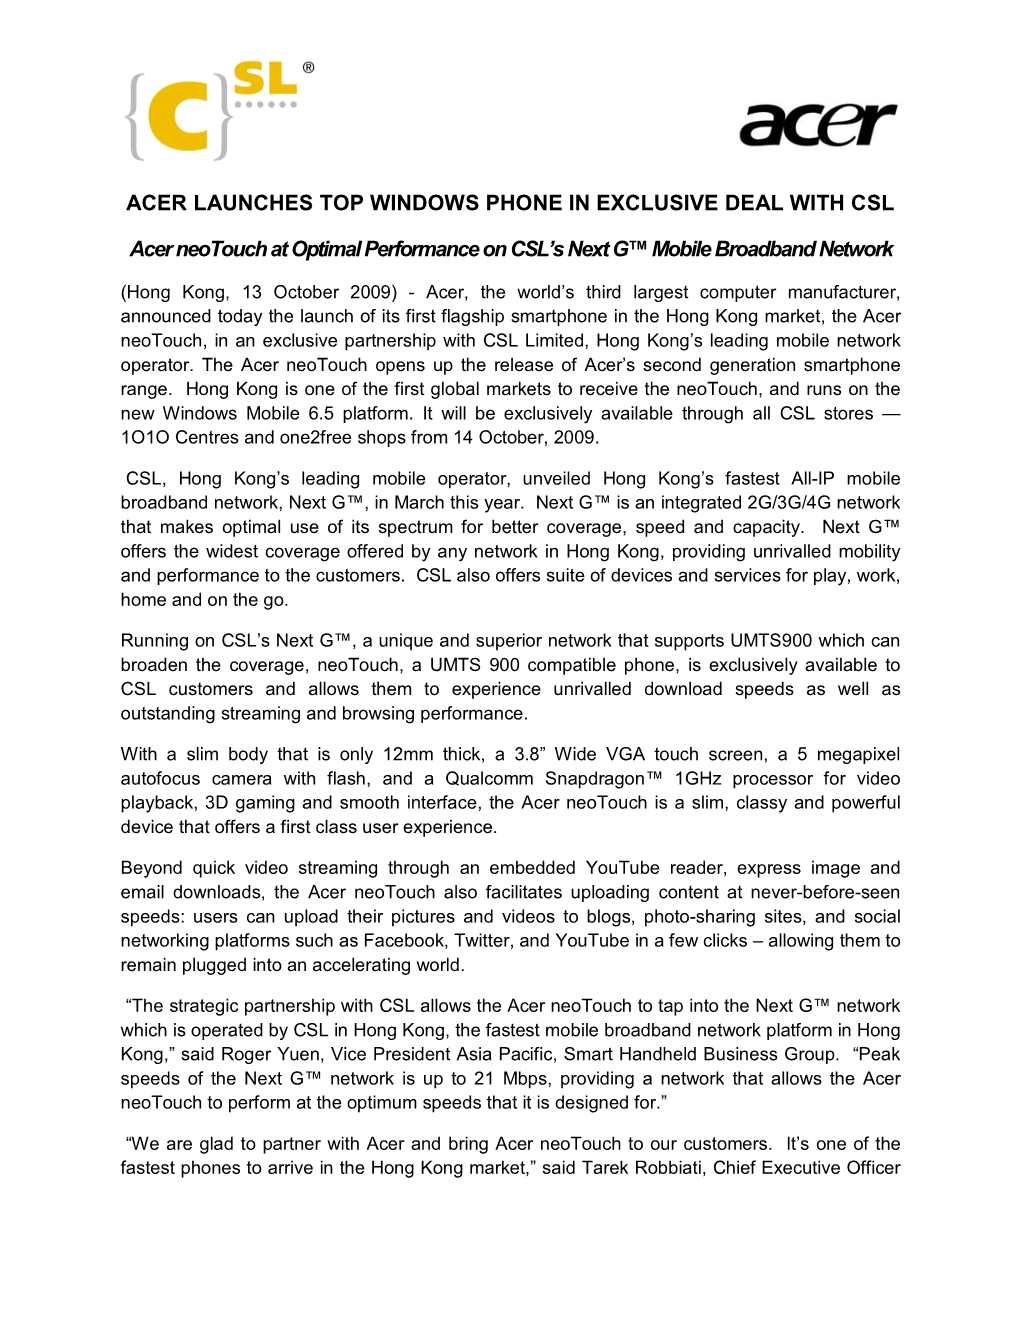 Acer Launches Top Windows Phone in Exclusive Deal with Csl